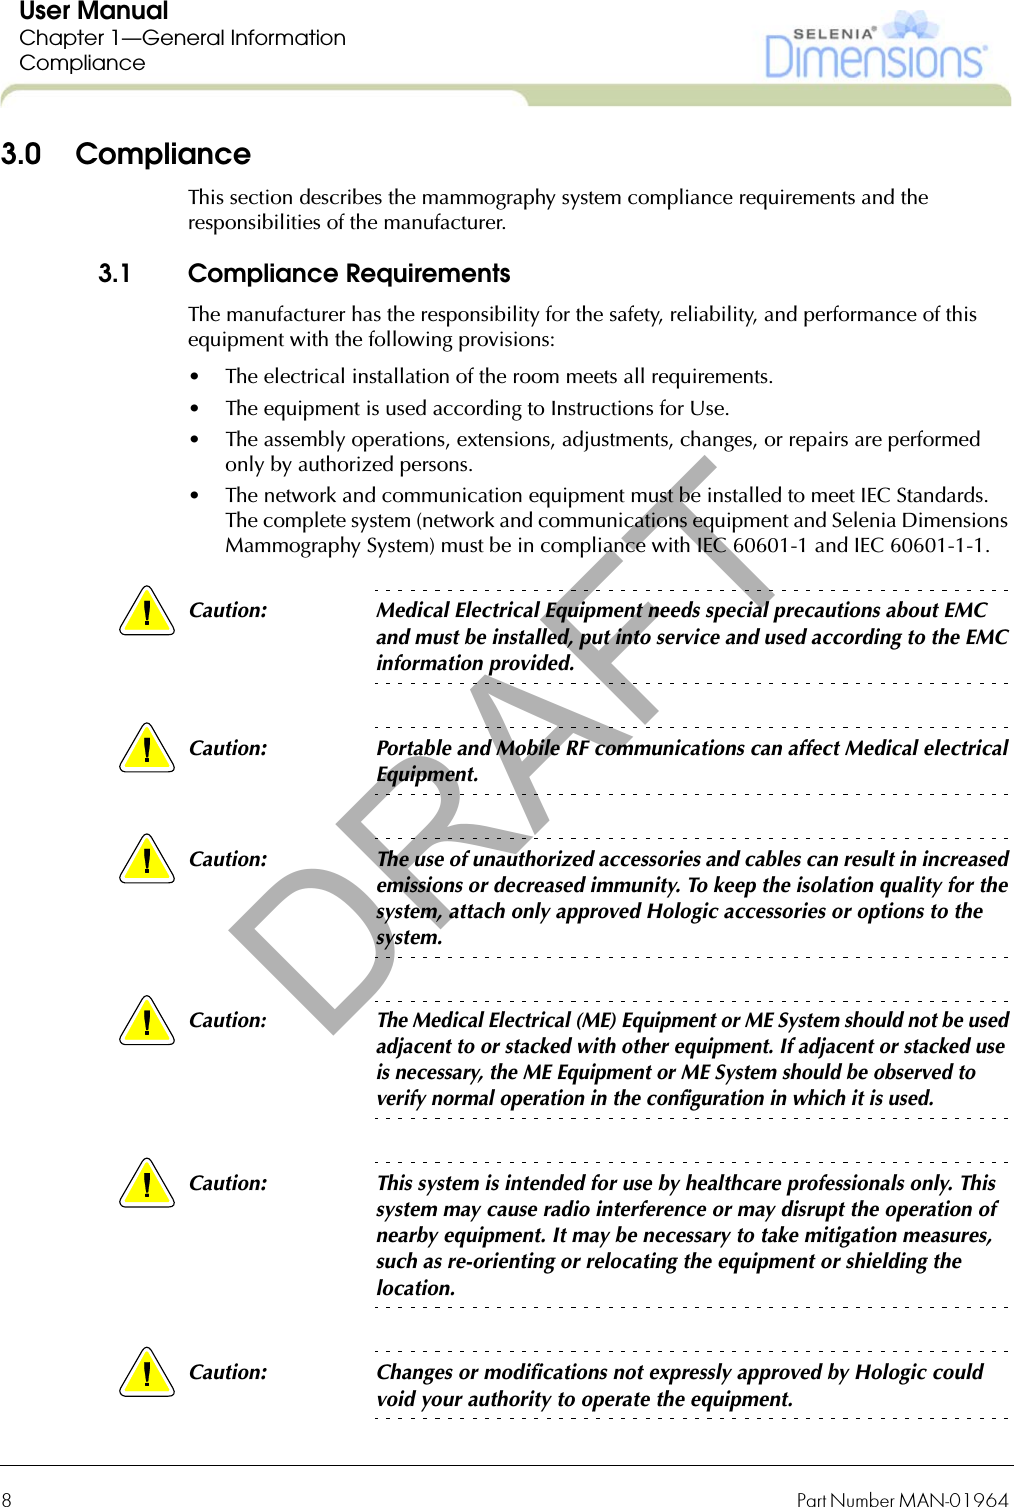 8Part Number MAN-01964 User ManualChapter 1—General InformationCompliance3.0 ComplianceThis section describes the mammography system compliance requirements and the responsibilities of the manufacturer.3.1 Compliance RequirementsThe manufacturer has the responsibility for the safety, reliability, and performance of this equipment with the following provisions:• The electrical installation of the room meets all requirements.• The equipment is used according to Instructions for Use.• The assembly operations, extensions, adjustments, changes, or repairs are performed only by authorized persons.• The network and communication equipment must be installed to meet IEC Standards. The complete system (network and communications equipment and Selenia Dimensions Mammography System) must be in compliance with IEC 60601-1 and IEC 60601-1-1.Caution:Medical Electrical Equipment needs special precautions about EMC and must be installed, put into service and used according to the EMC information provided.Caution:Portable and Mobile RF communications can affect Medical electrical Equipment.Caution:The use of unauthorized accessories and cables can result in increased emissions or decreased immunity. To keep the isolation quality for the system, attach only approved Hologic accessories or options to the system.Caution:The Medical Electrical (ME) Equipment or ME System should not be used adjacent to or stacked with other equipment. If adjacent or stacked use is necessary, the ME Equipment or ME System should be observed to verify normal operation in the configuration in which it is used.Caution:This system is intended for use by healthcare professionals only. This system may cause radio interference or may disrupt the operation of nearby equipment. It may be necessary to take mitigation measures, such as re-orienting or relocating the equipment or shielding the location.Caution:Changes or modifications not expressly approved by Hologic could void your authority to operate the equipment.DRAFT